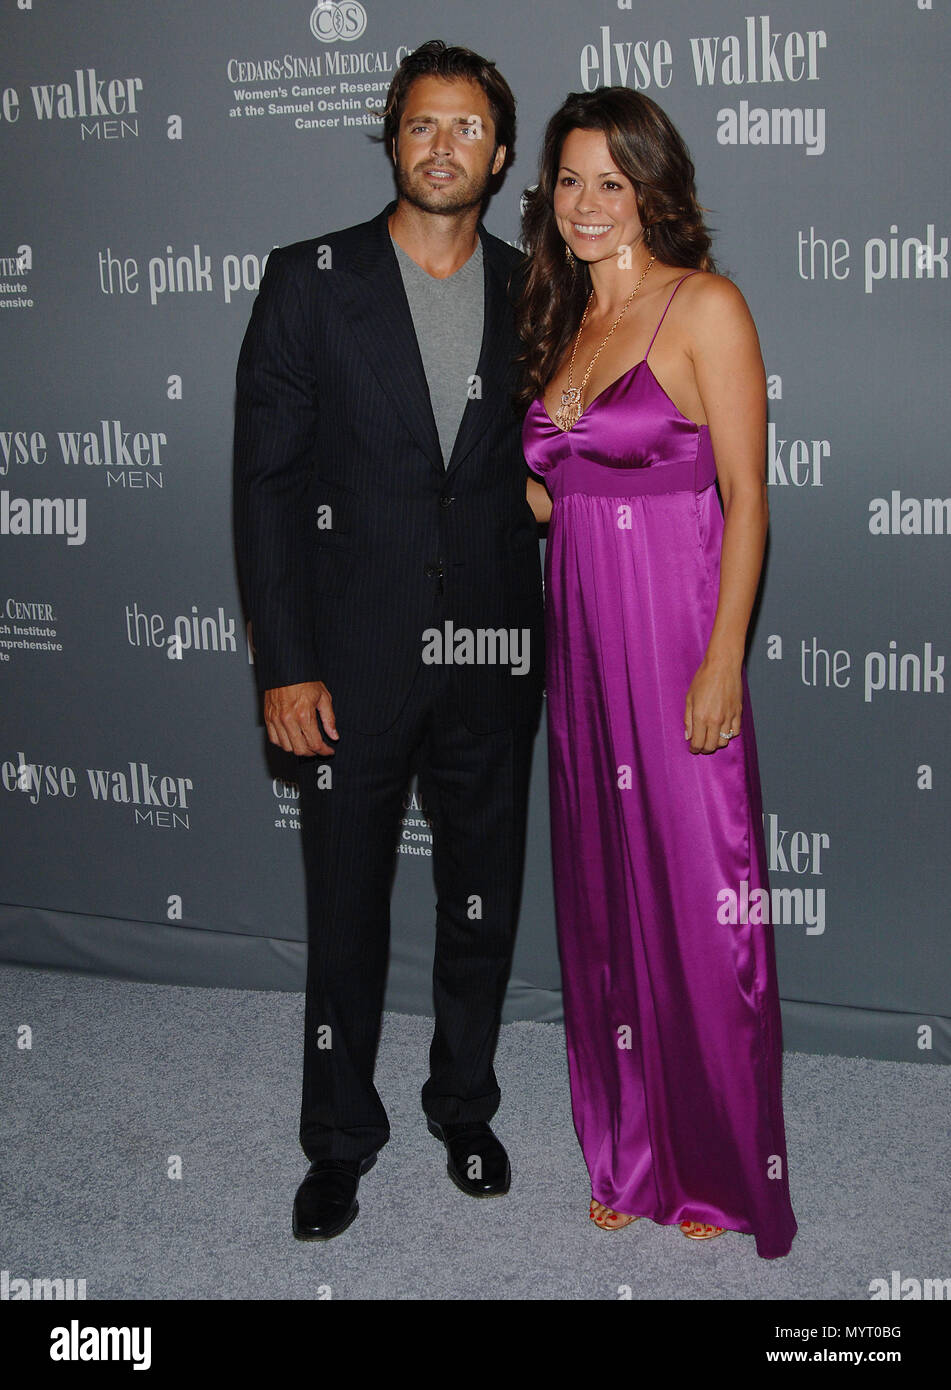 David Charvet and Brooke Burke  -  4TH Annual Pink Party To Benefit Cedars-SSinai's Women Cancer Research Institute at the Santa Monica Airport  In Los Angeles.  full length eye contact smile  BurkeBrooke CharvetDavid 51  Event in Hollywood Life - California, Red Carpet Event, USA, Film Industry, Celebrities, Photography, Bestof, Arts Culture and Entertainment, Celebrities fashion, Best of, Hollywood Life, Event in Hollywood Life - California, Red Carpet and backstage, Music celebrities, Topix, Couple, family ( husband and wife ) and kids- Children, brothers and sisters inquiry tsuni@Gamma-USA Stock Photo